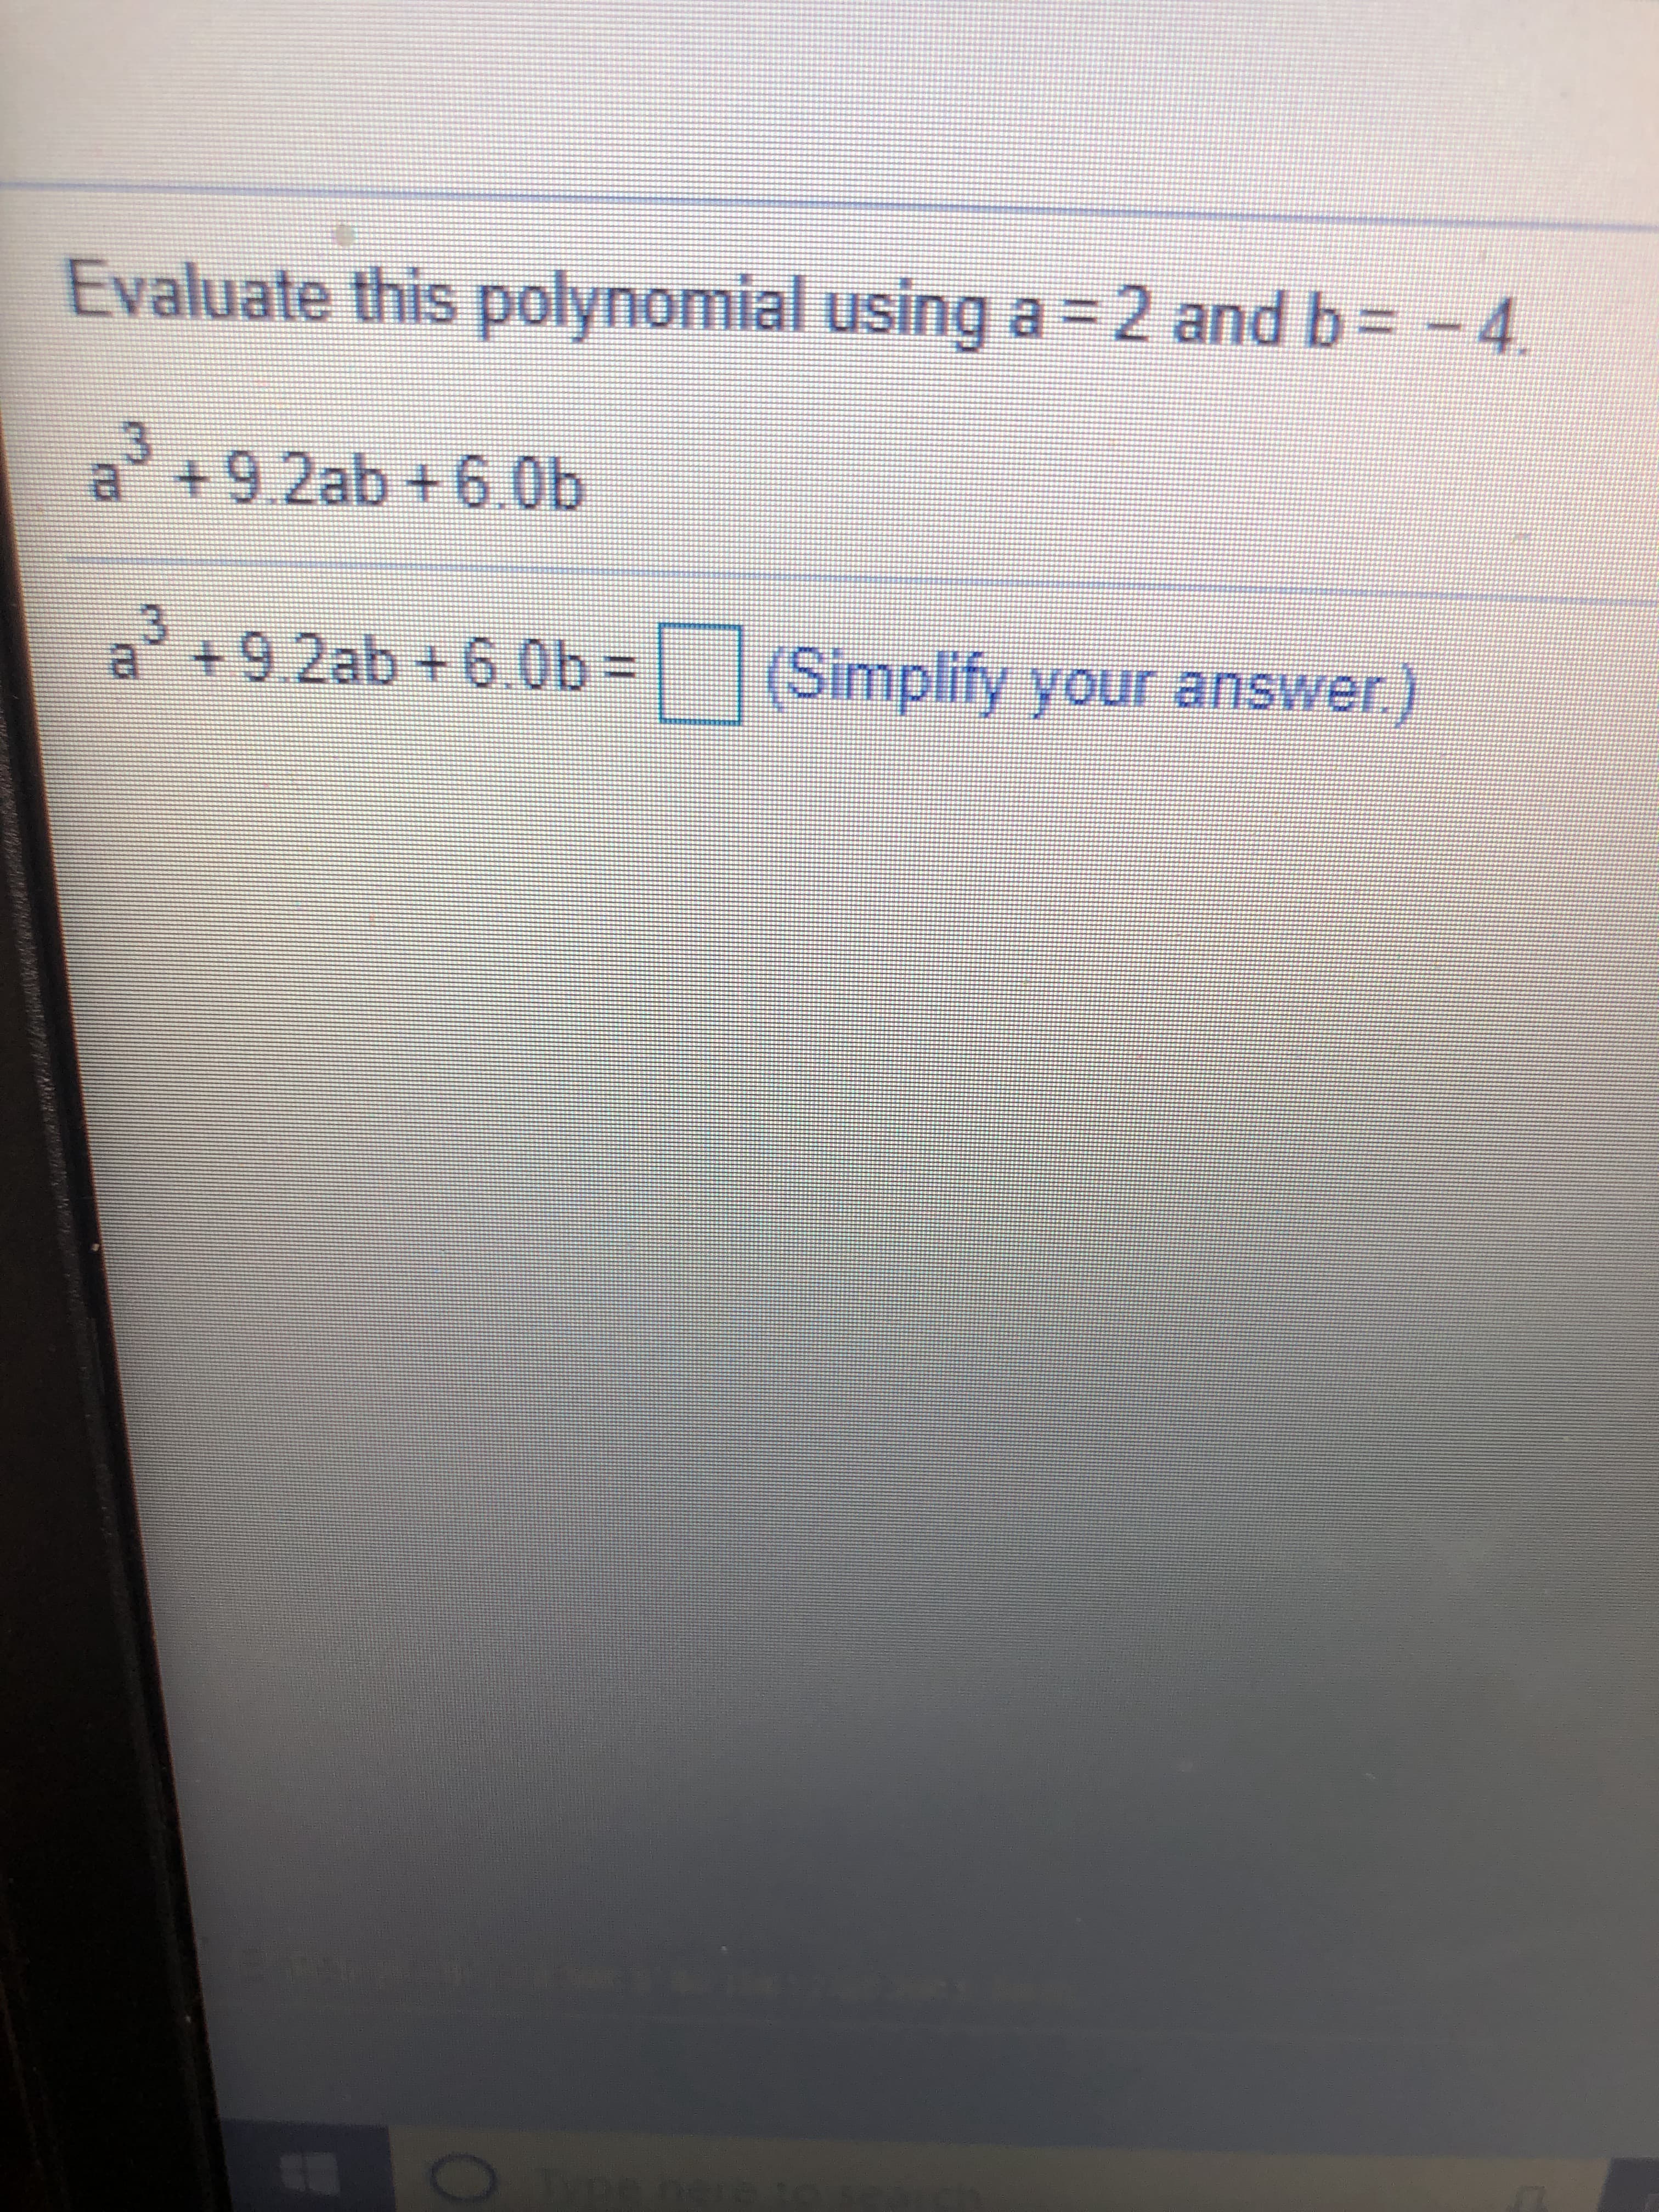 Evaluate this polynomial using a 2 and b= -4.
a+9.2ab +6.0b
